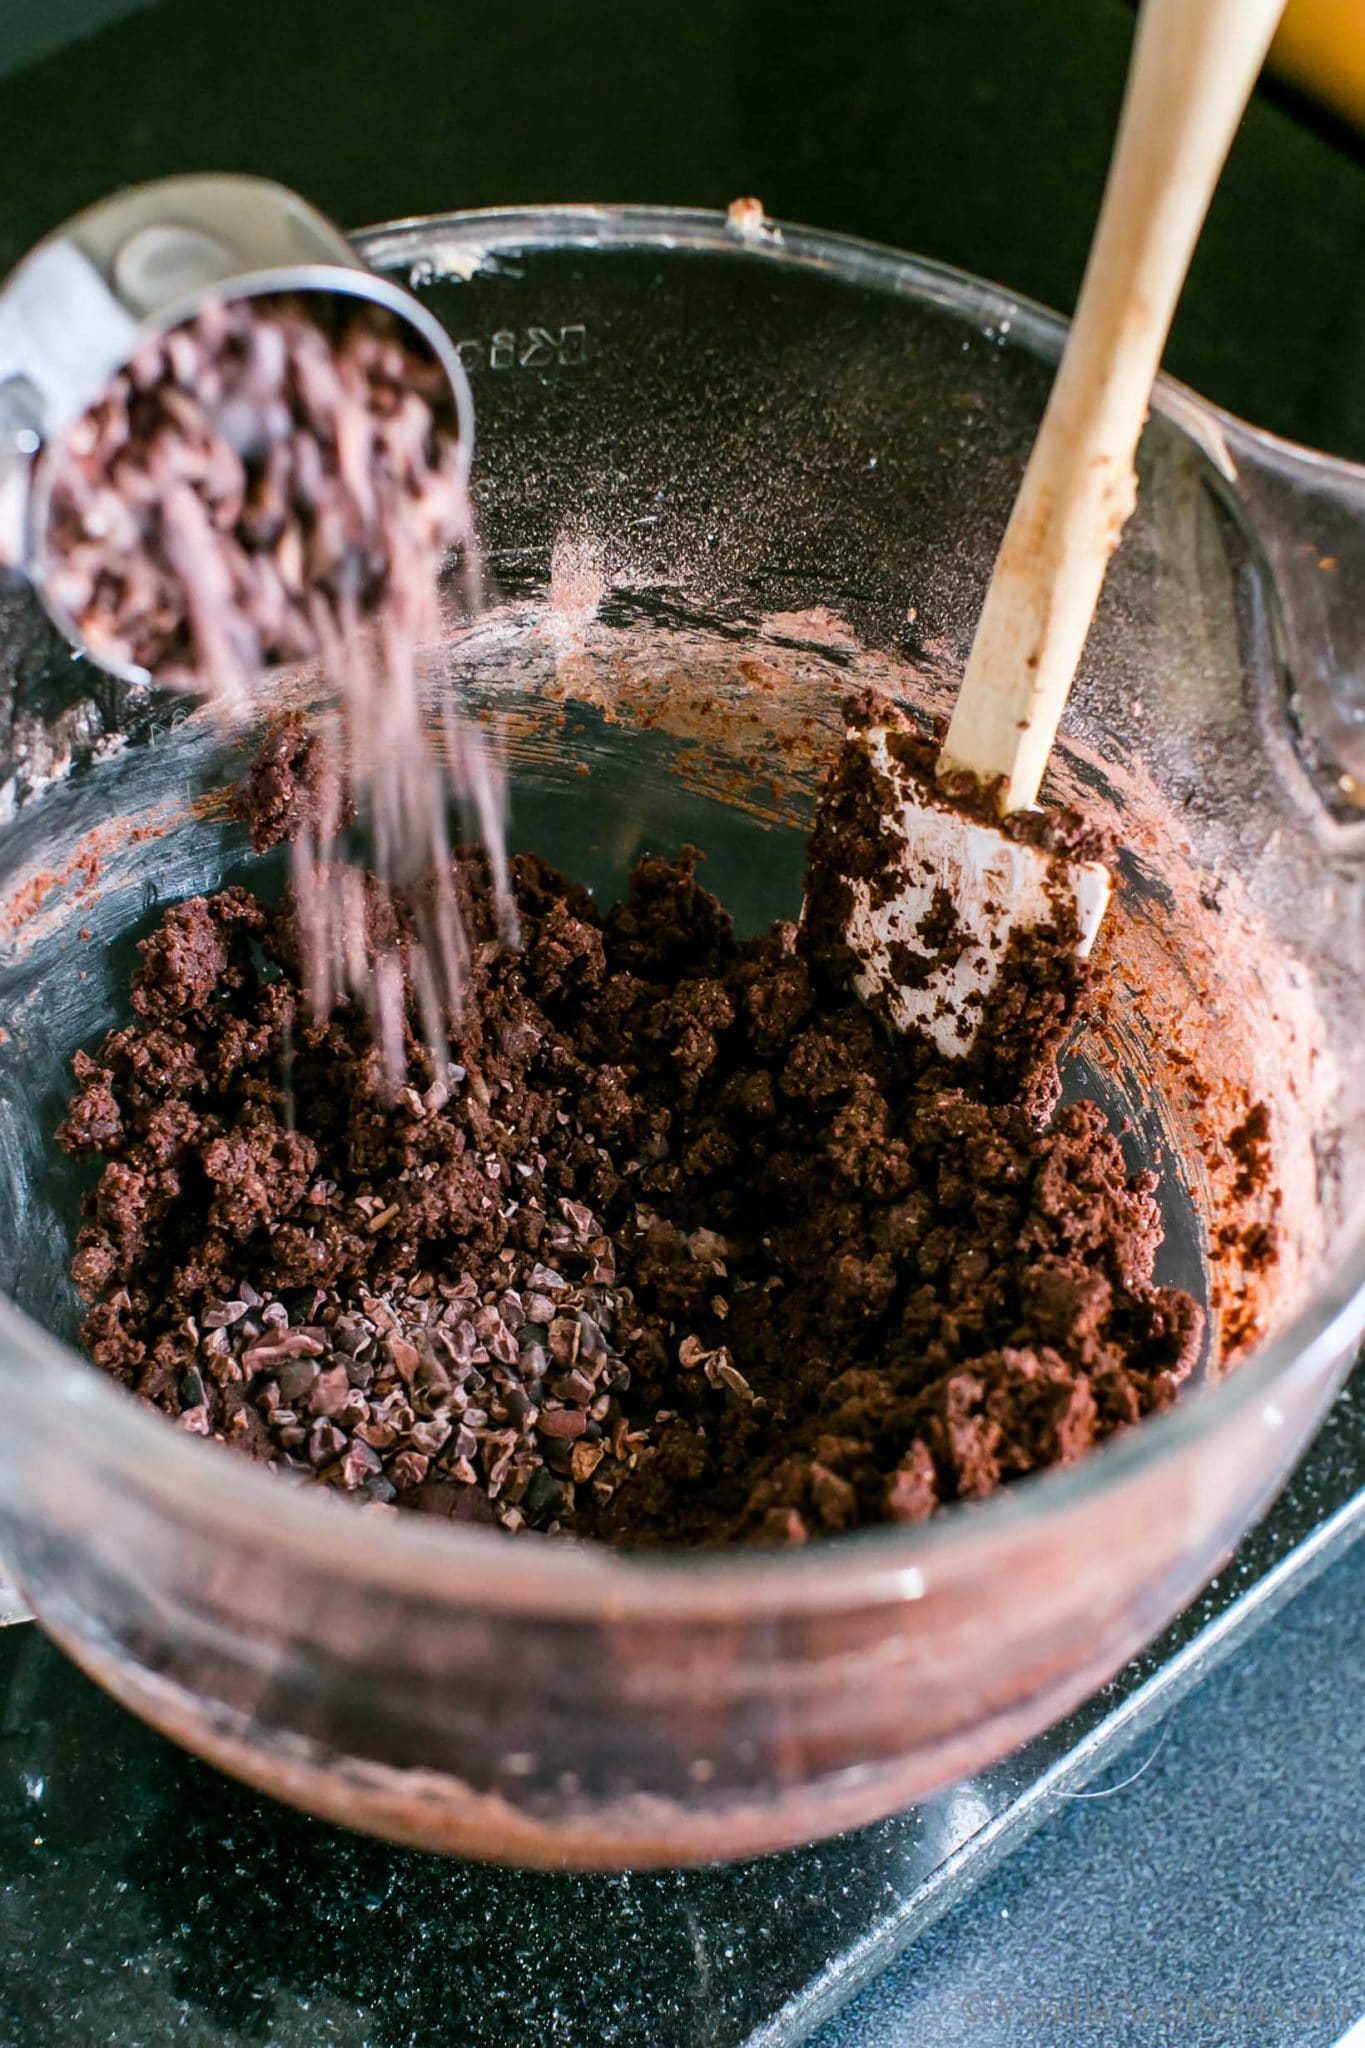 Pouring cocoa nibs into the cookie batter.